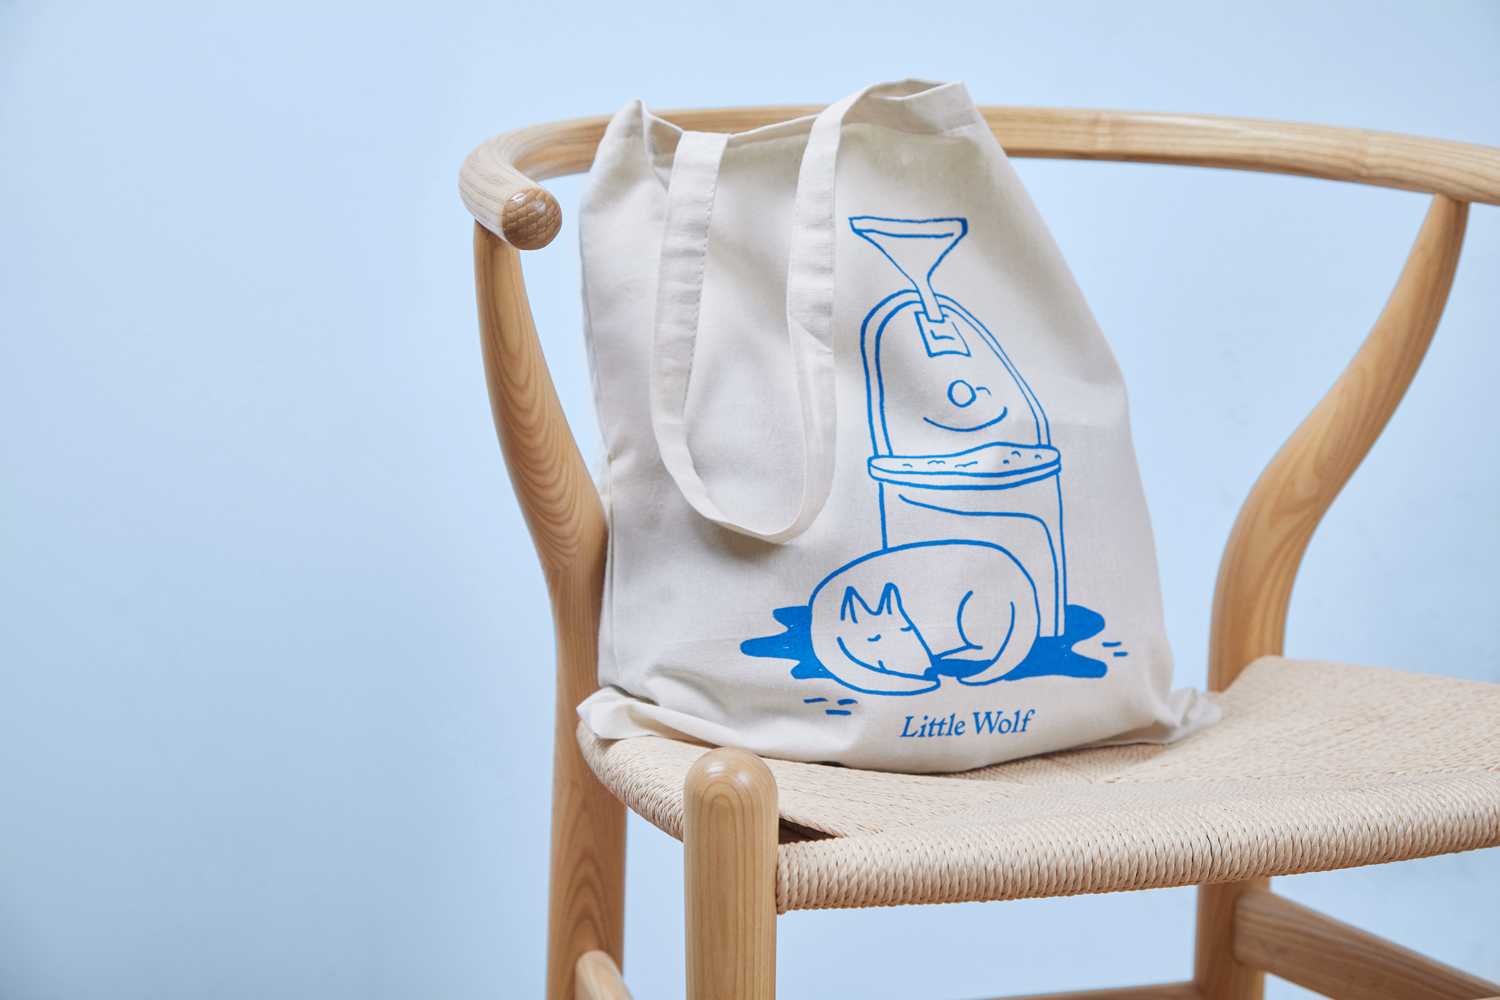 Tote Bag Design – Little Wolf by Perky Bros, United States